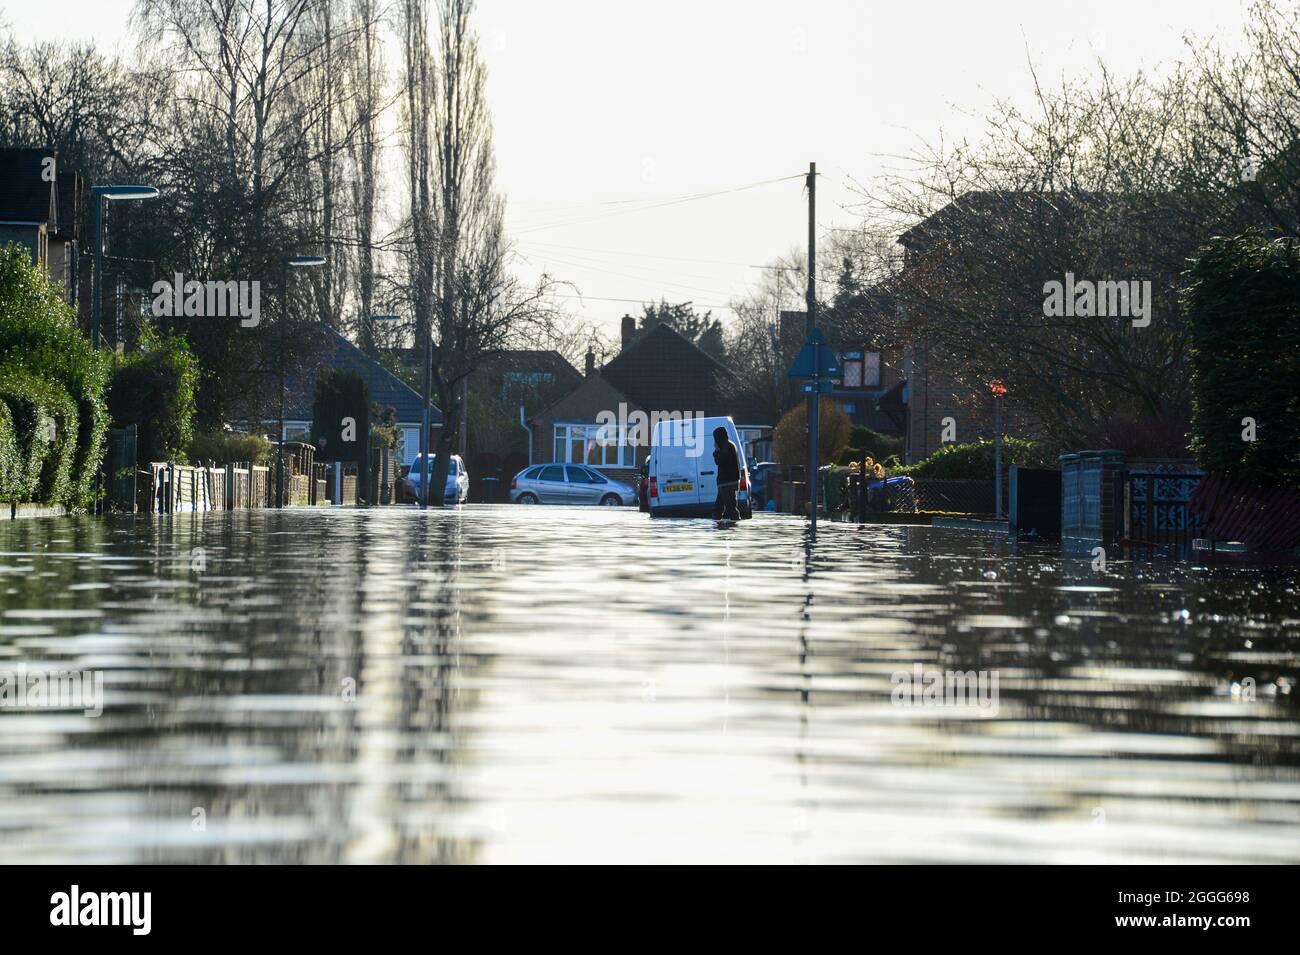 The British Army give aid to residents in flood stricken Chertsey. Providing sandbags and aid where needed Stock Photo